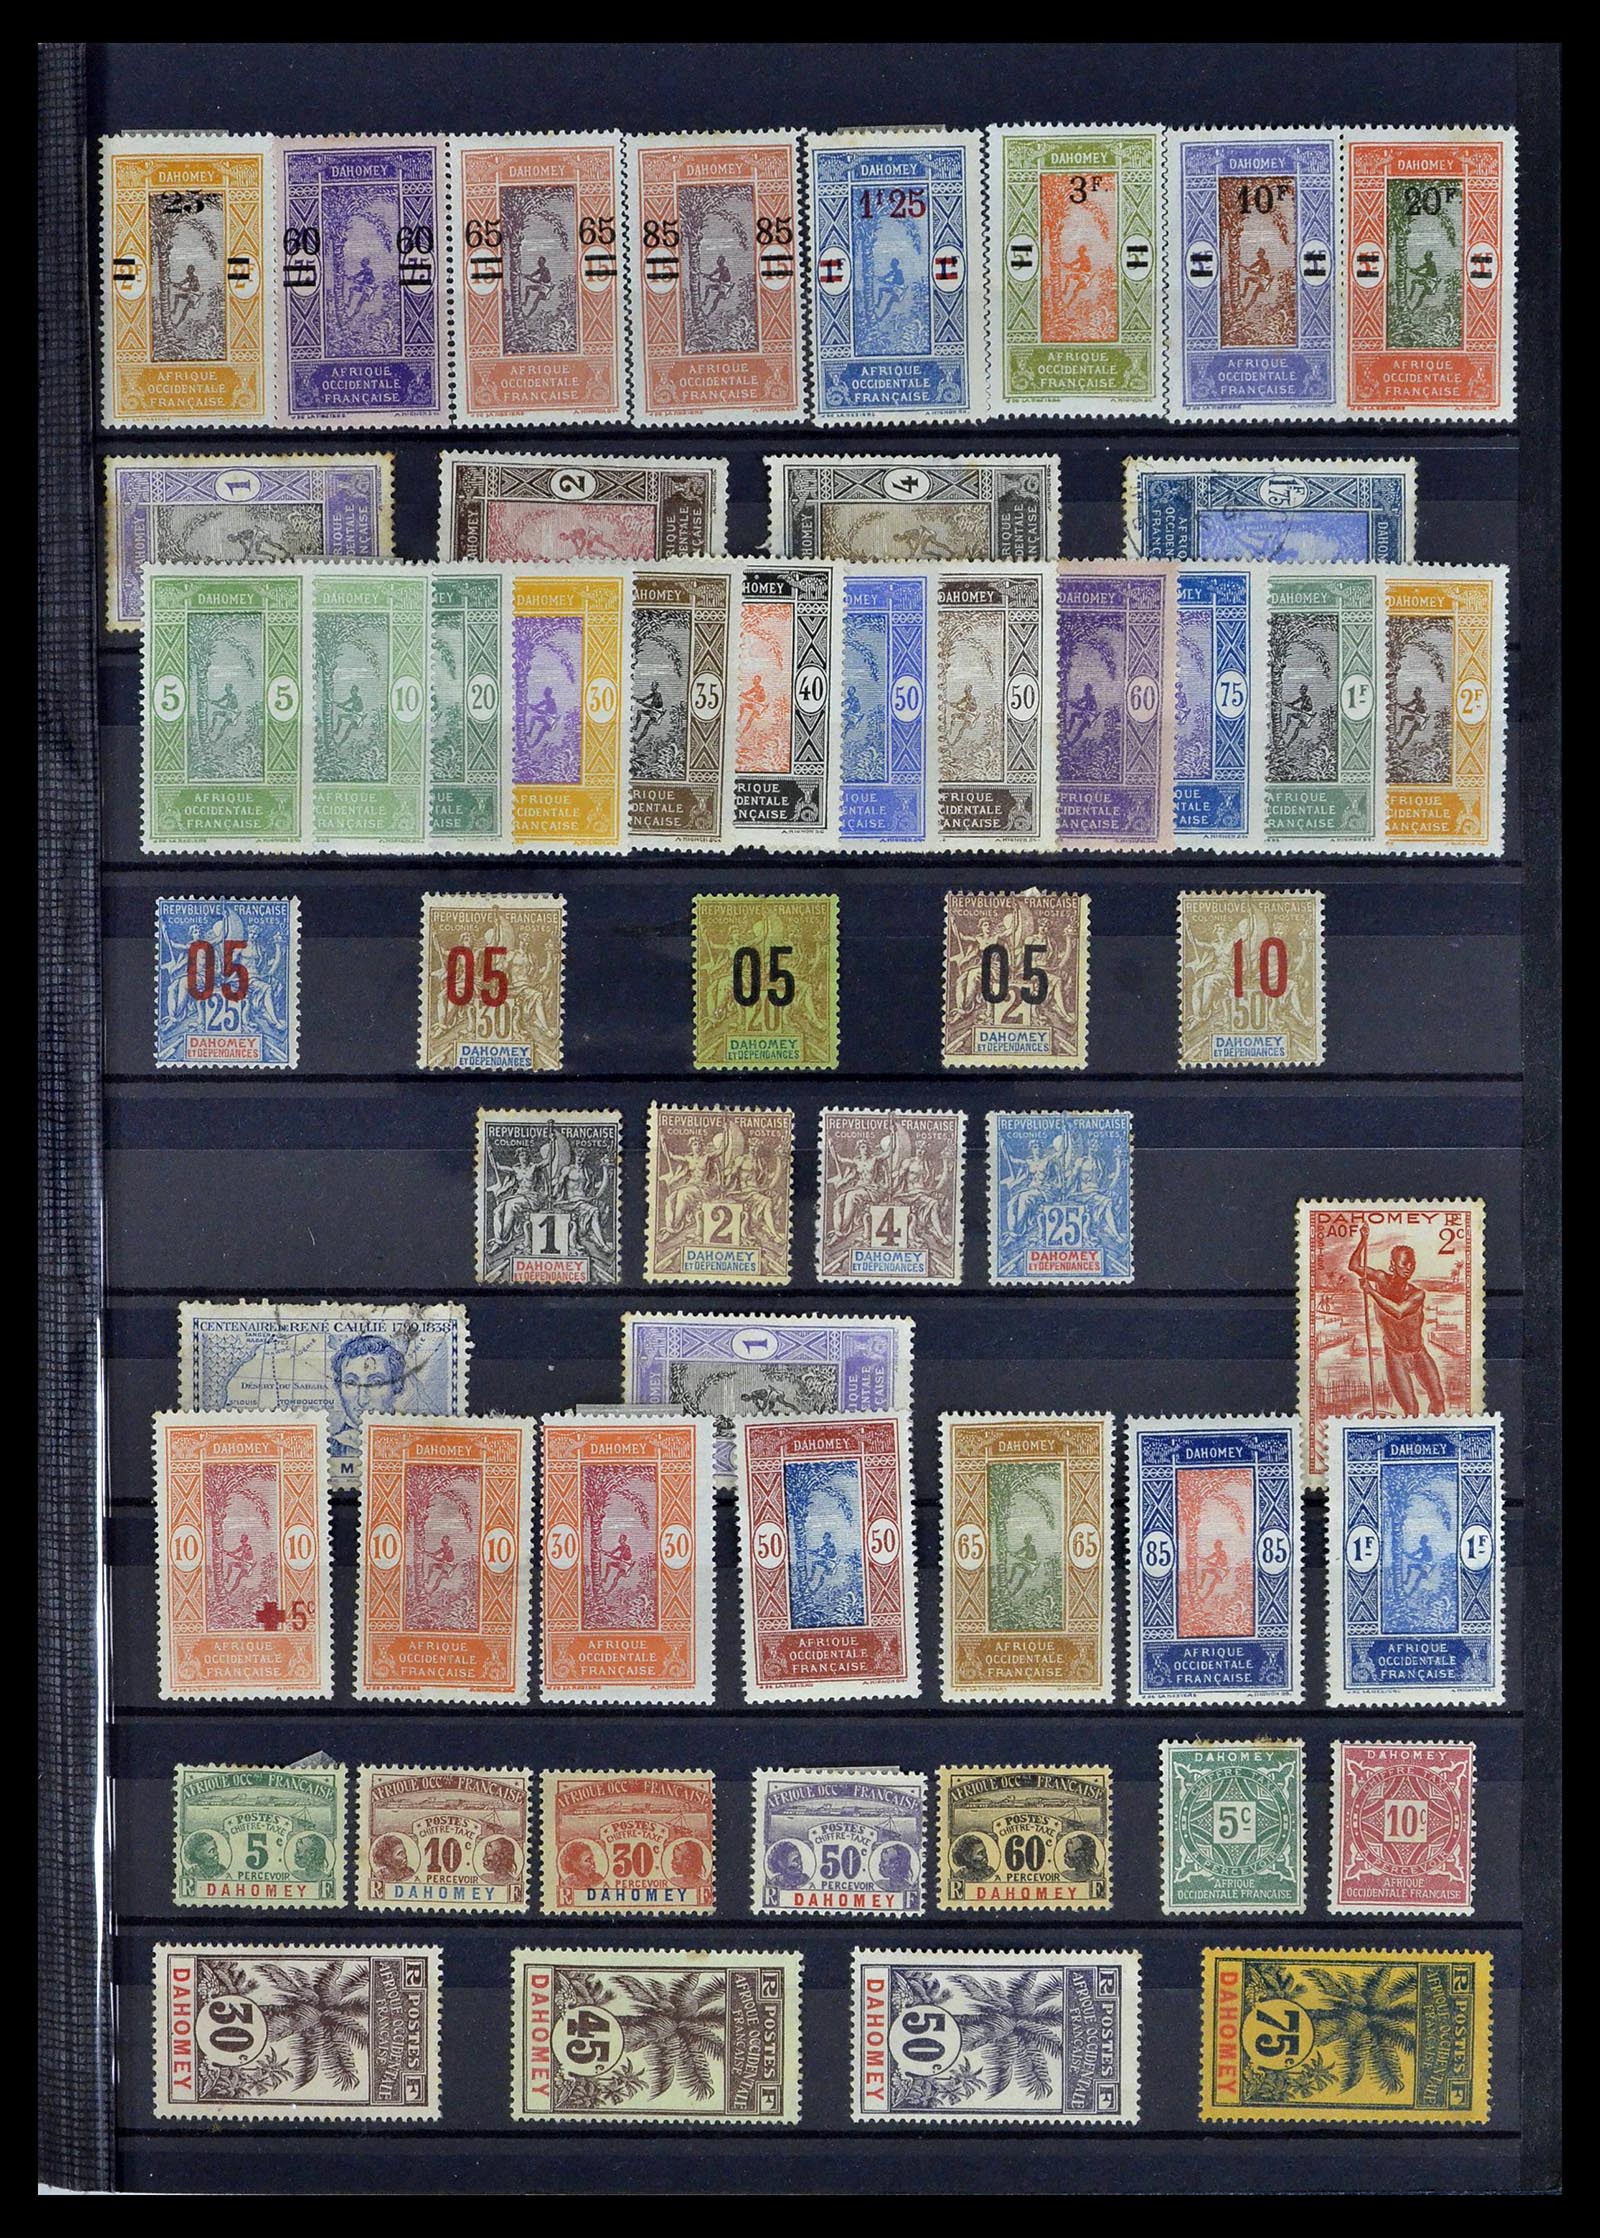 39097 0013 - Stamp collection 39097 French colonies 1880-2000.